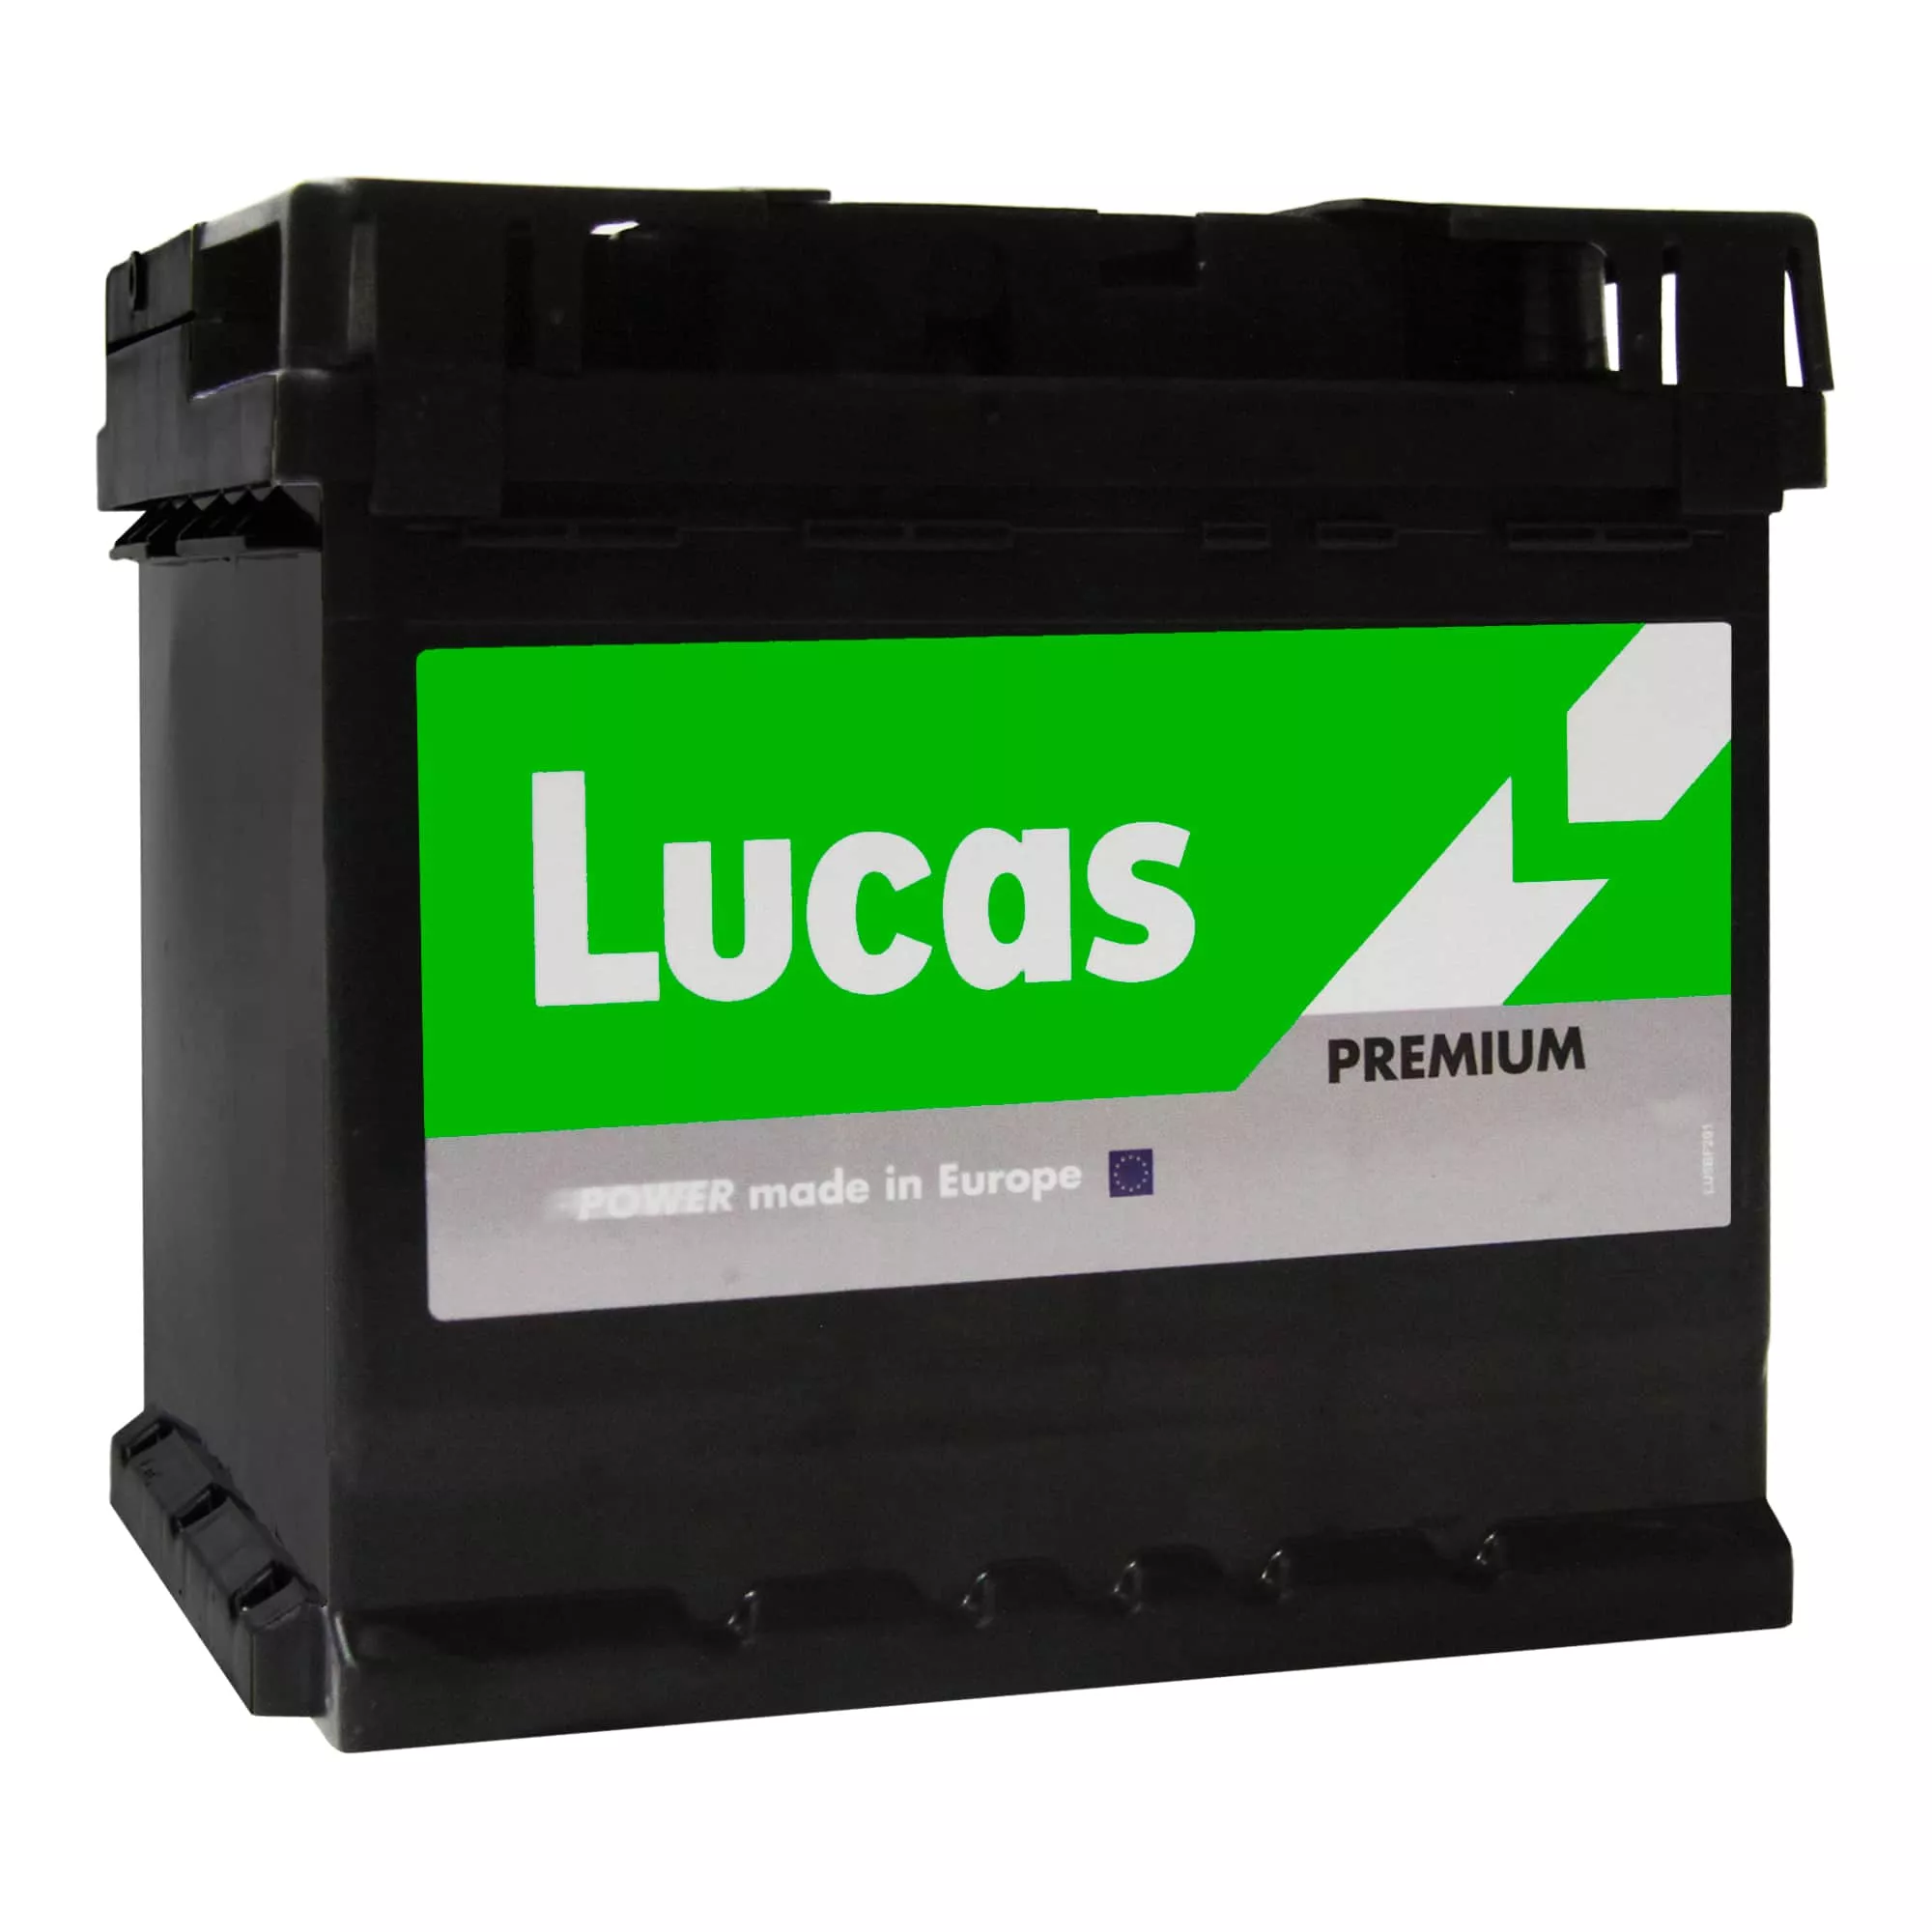 Акумулятор Lucas (Batteries manufactured by Exide in Spain) 6CT-53 АзЕ (LBPA530)